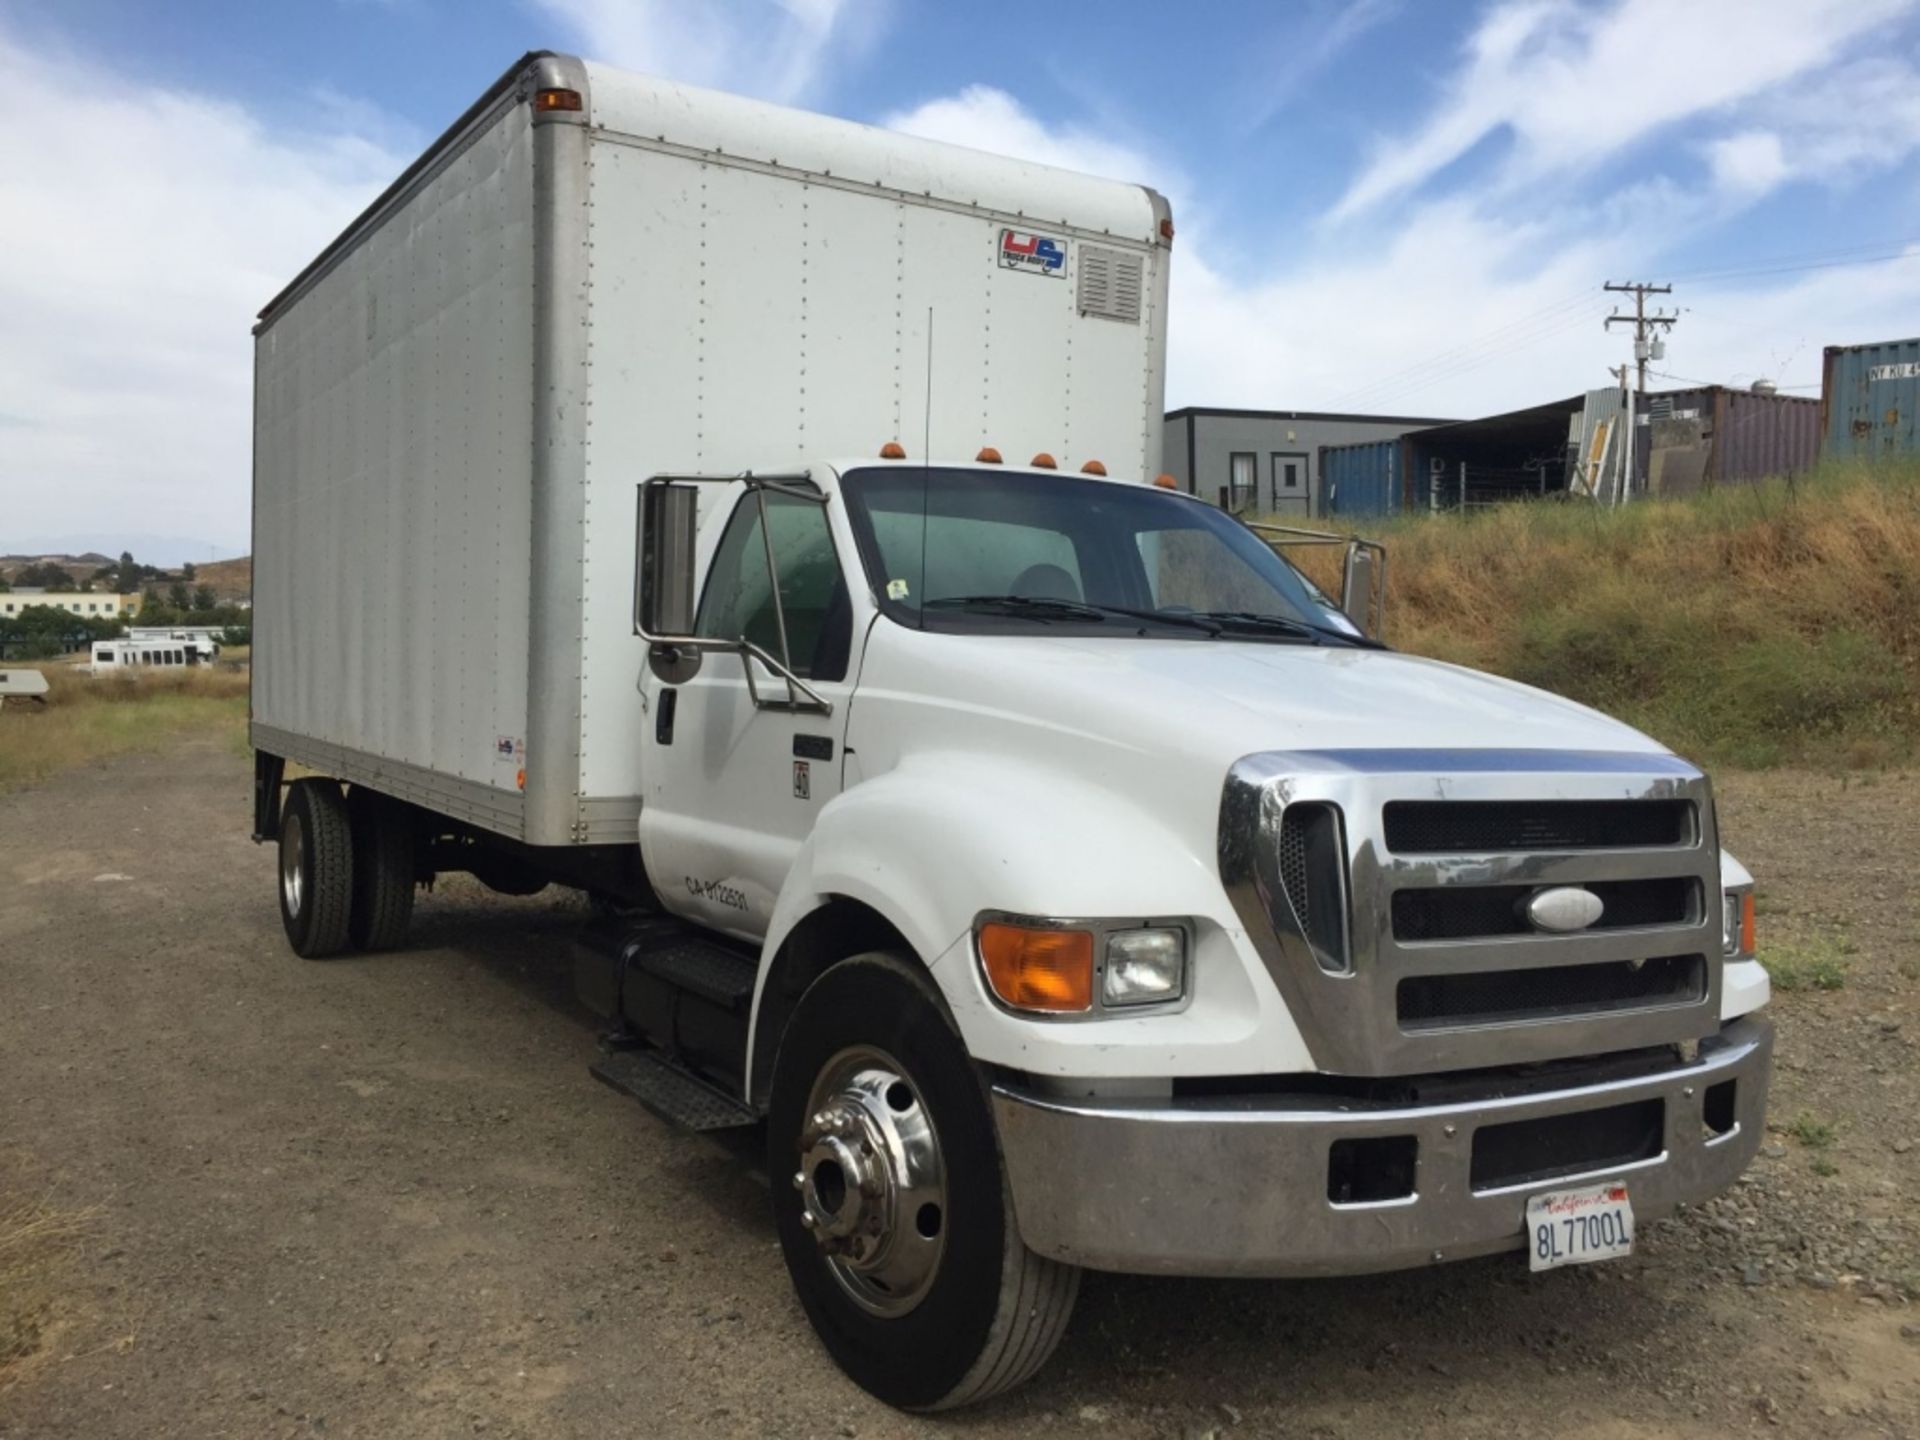 Ford F650 Van Truck, - Image 2 of 85